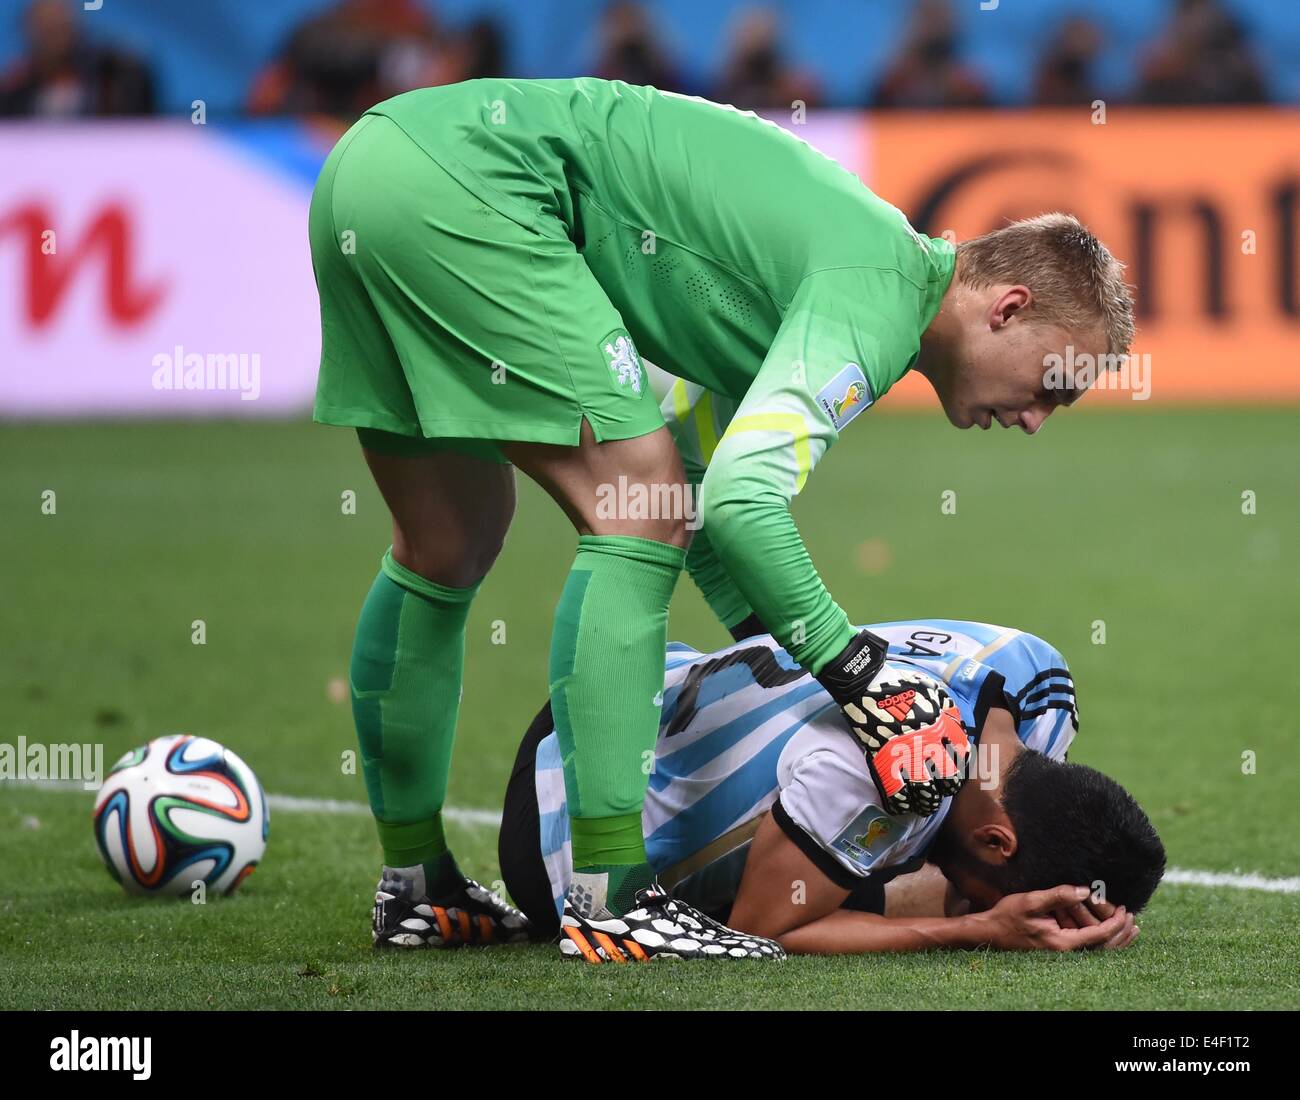 Sao Paulo, Brazil. 9th July, 2014. Netherlands' goalkeeper Jasper Cillessen helps Argentina's Ezequiel Garay who falls down during a semifinal match between Netherlands and Argentina of 2014 FIFA World Cup at the Arena de Sao Paulo Stadium in Sao Paulo, Brazil, on July 9, 2014. Credit:  Wang Yuguo/Xinhua/Alamy Live News Stock Photo